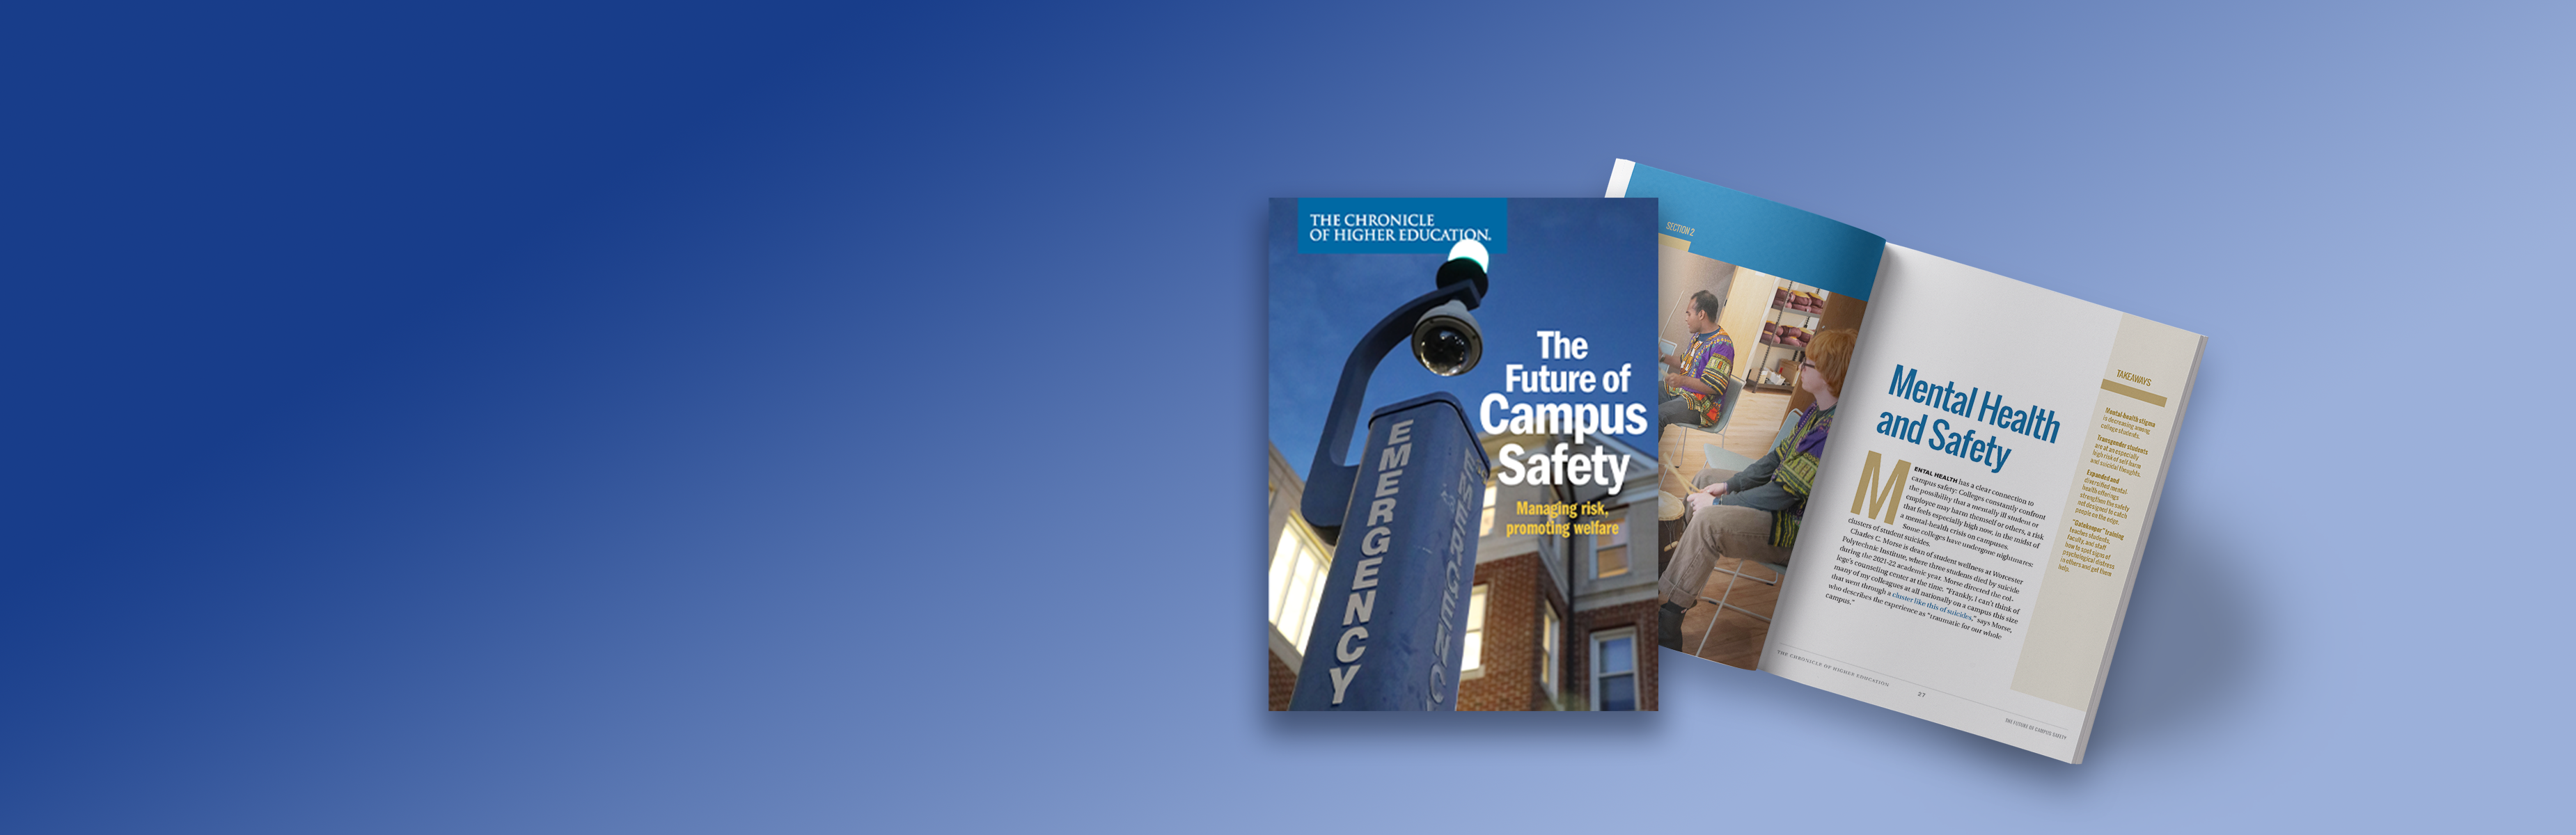 Chronicle Report: The Future of Campus Safety